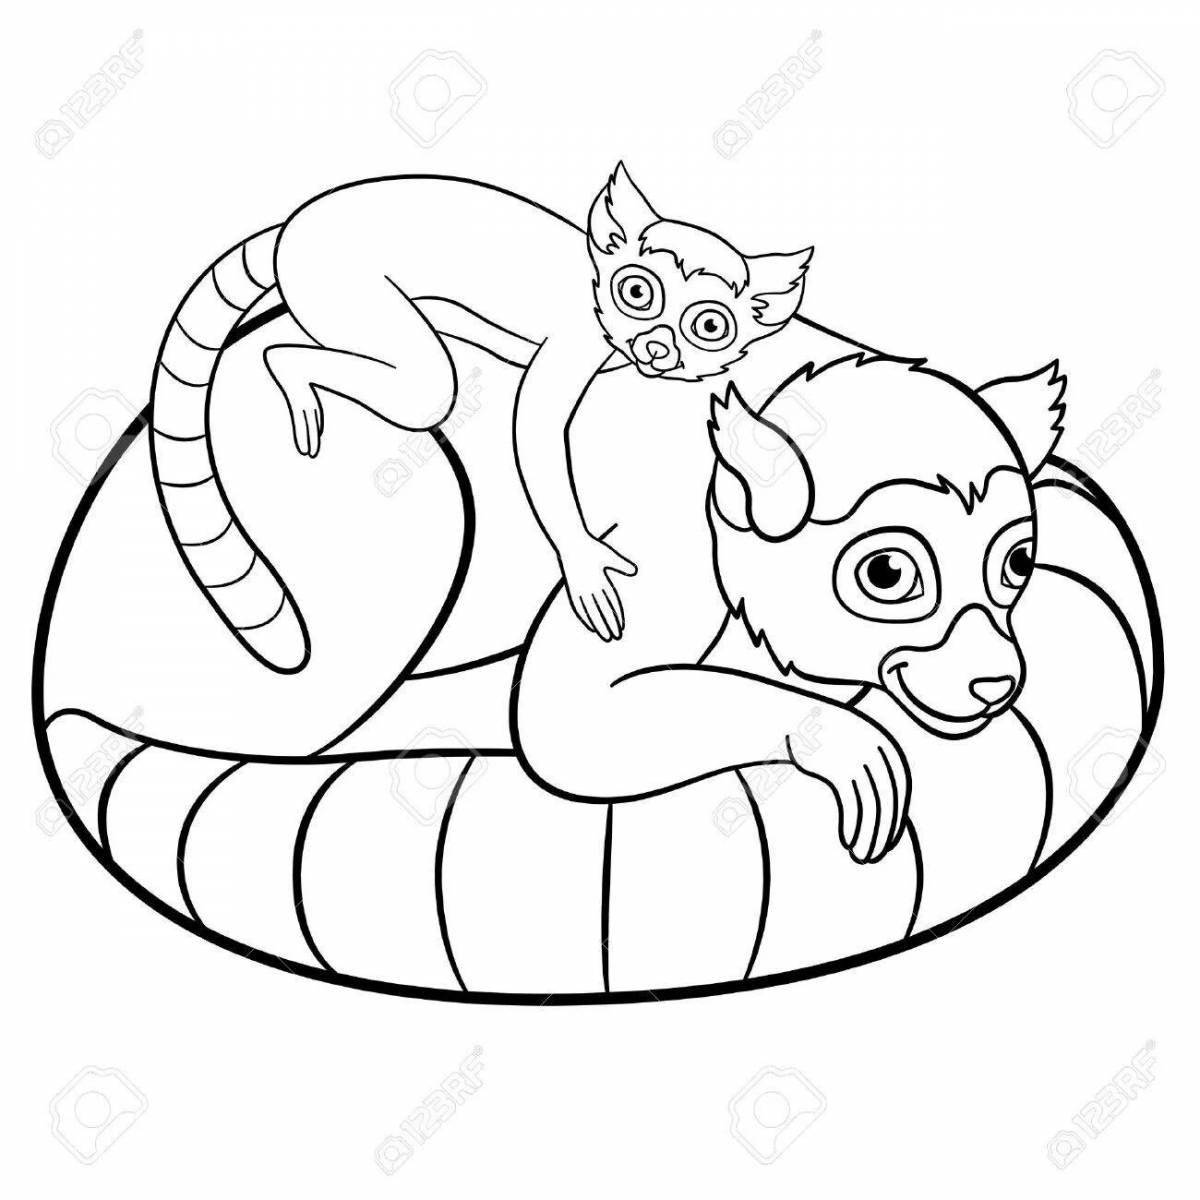 Radiant limur coloring page